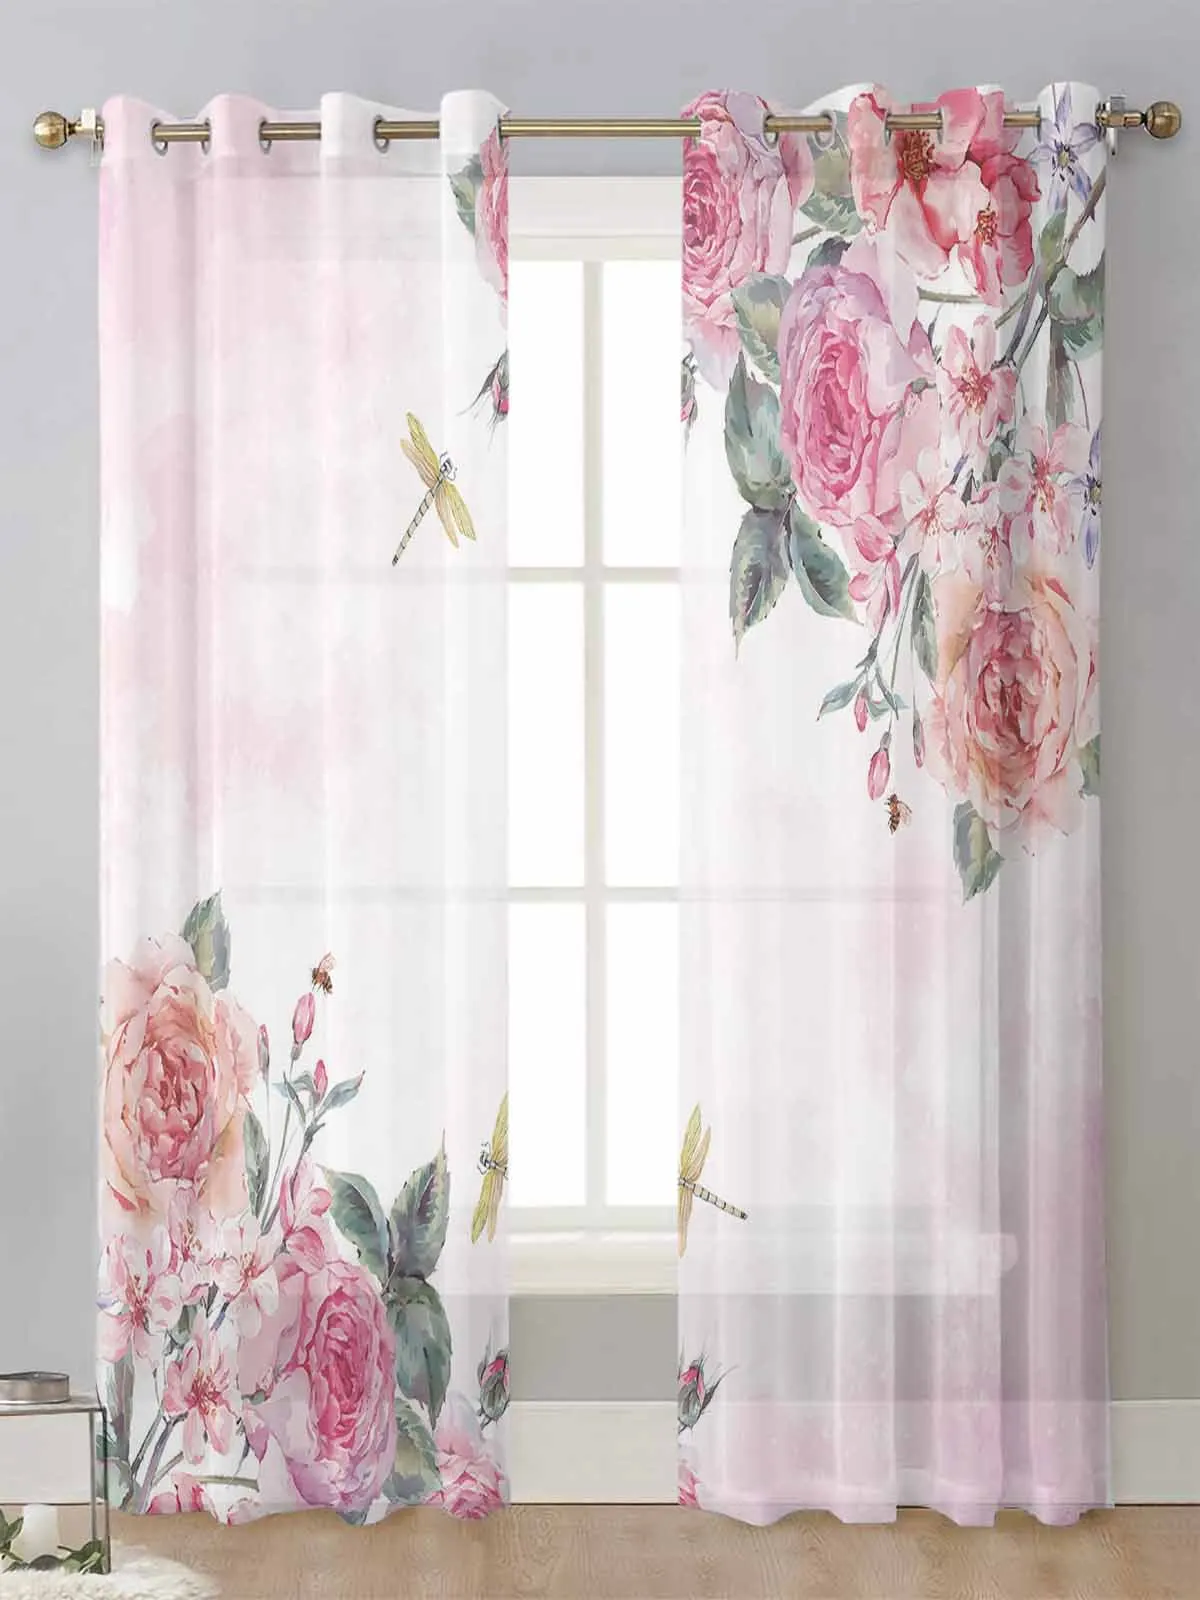 

Pink Flower Dragonfly Watercolor Sheer Curtains For Living Room Window Voile Tulle Curtain Cortinas Drapes Home Decor